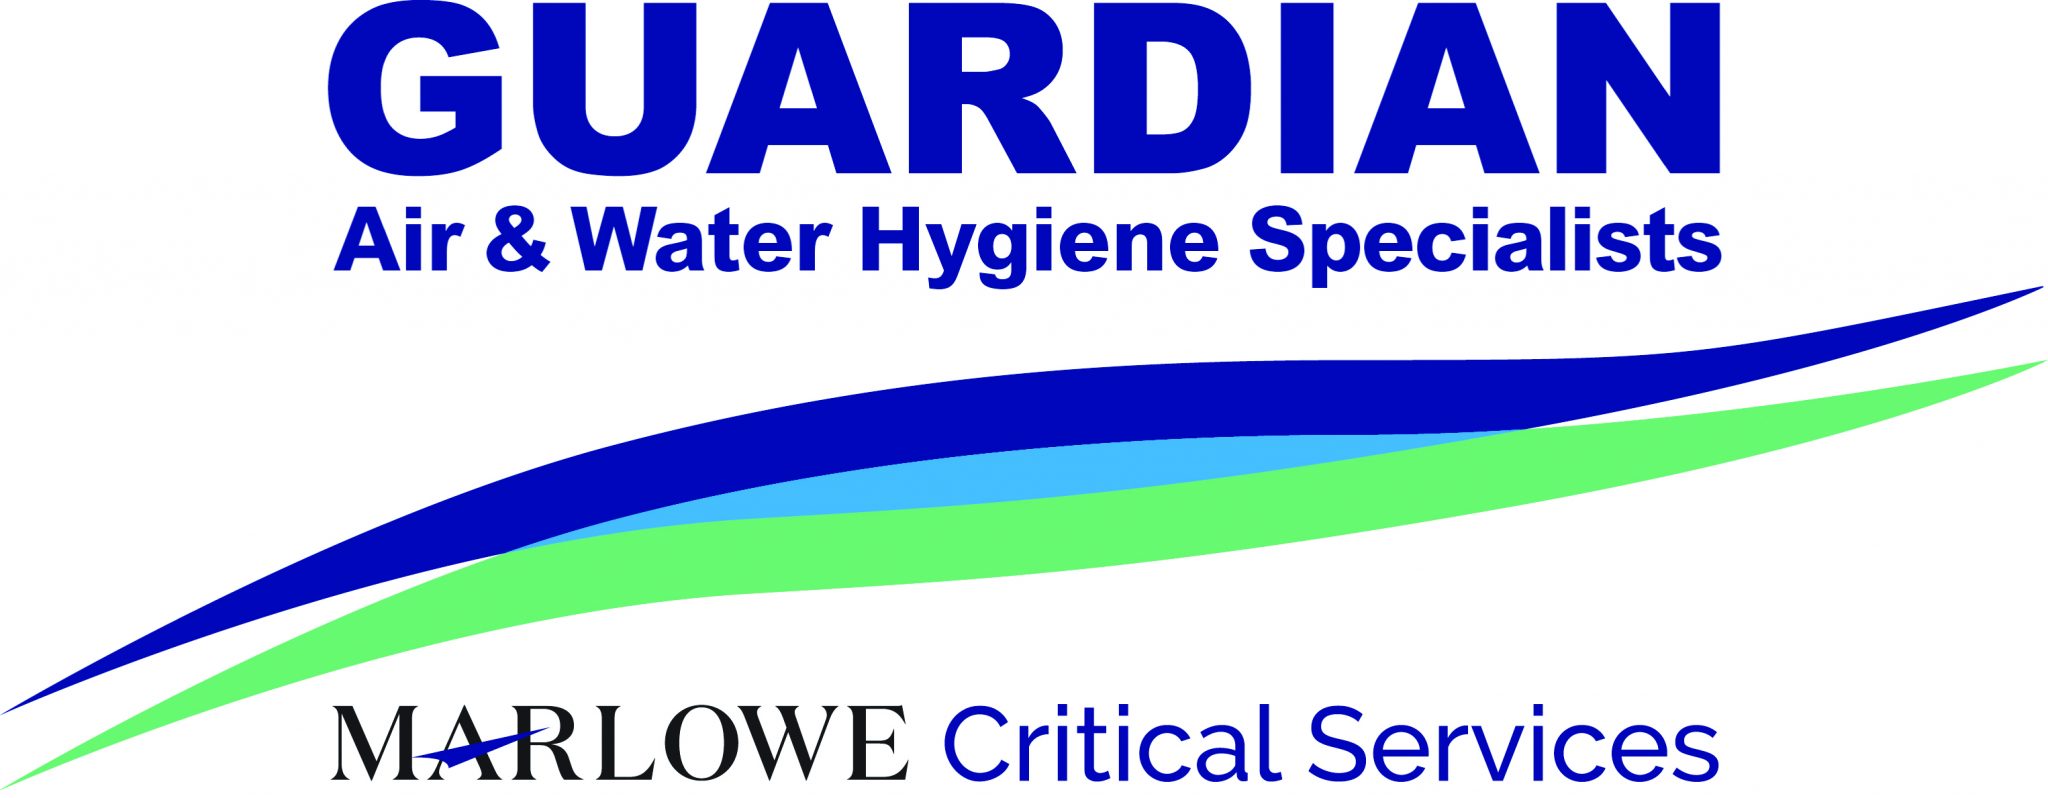 Steven Booth takes helm at Guardian Water Treatment